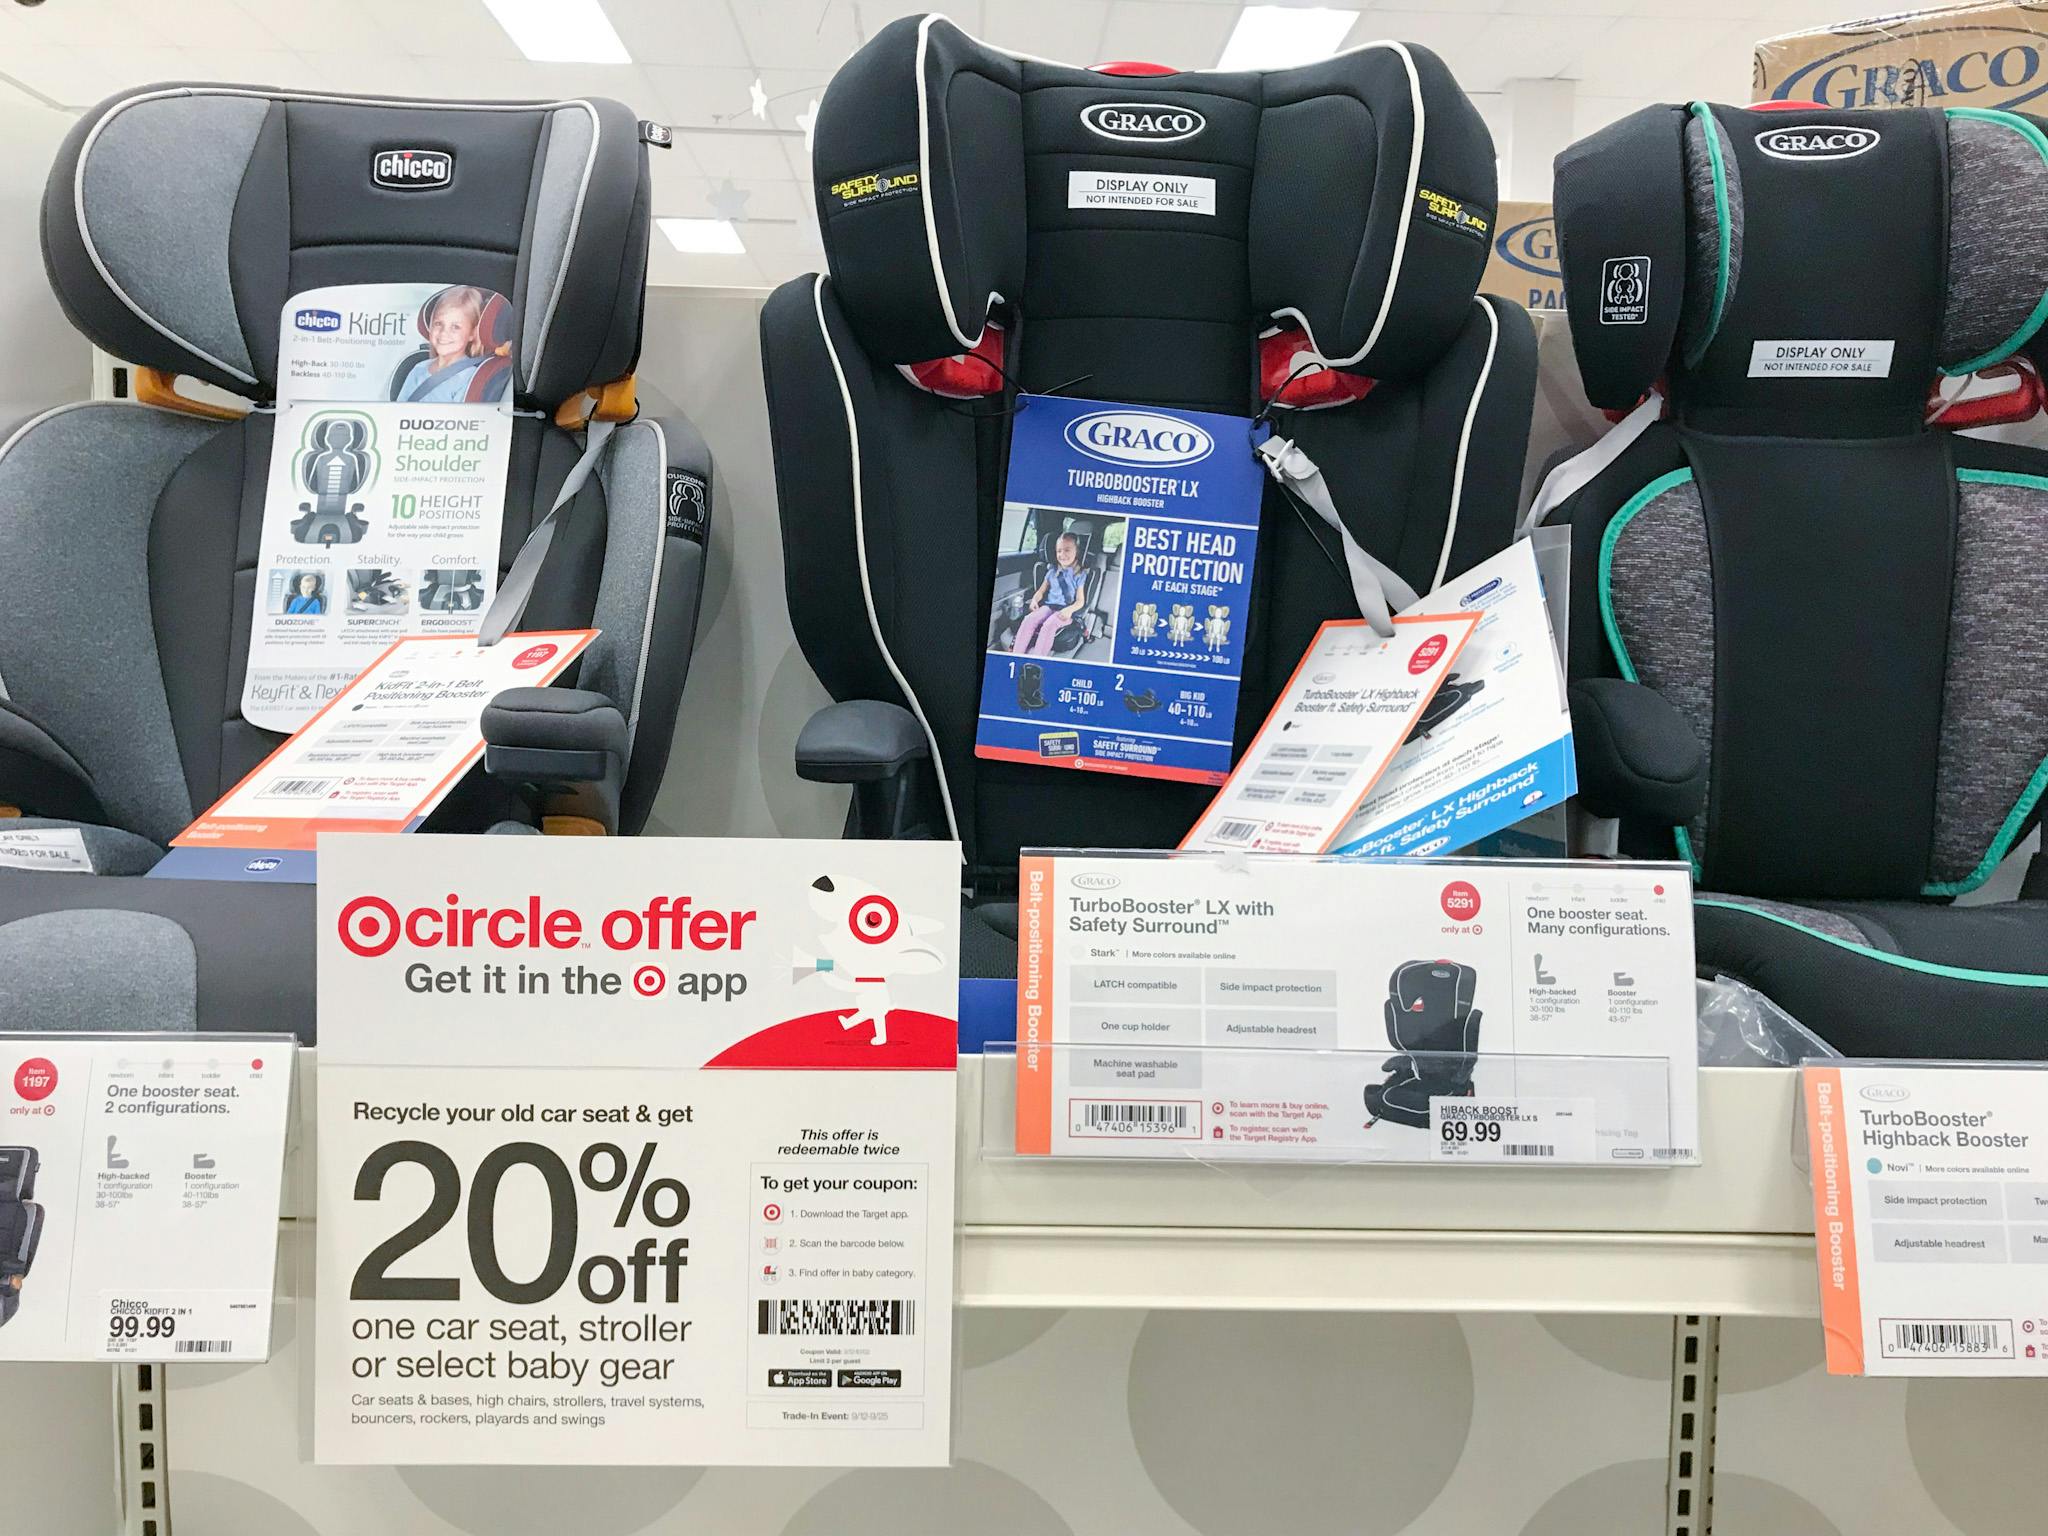 Car seats on the shelf at Target with a sign advertising 20% off car seat trade-in offer.